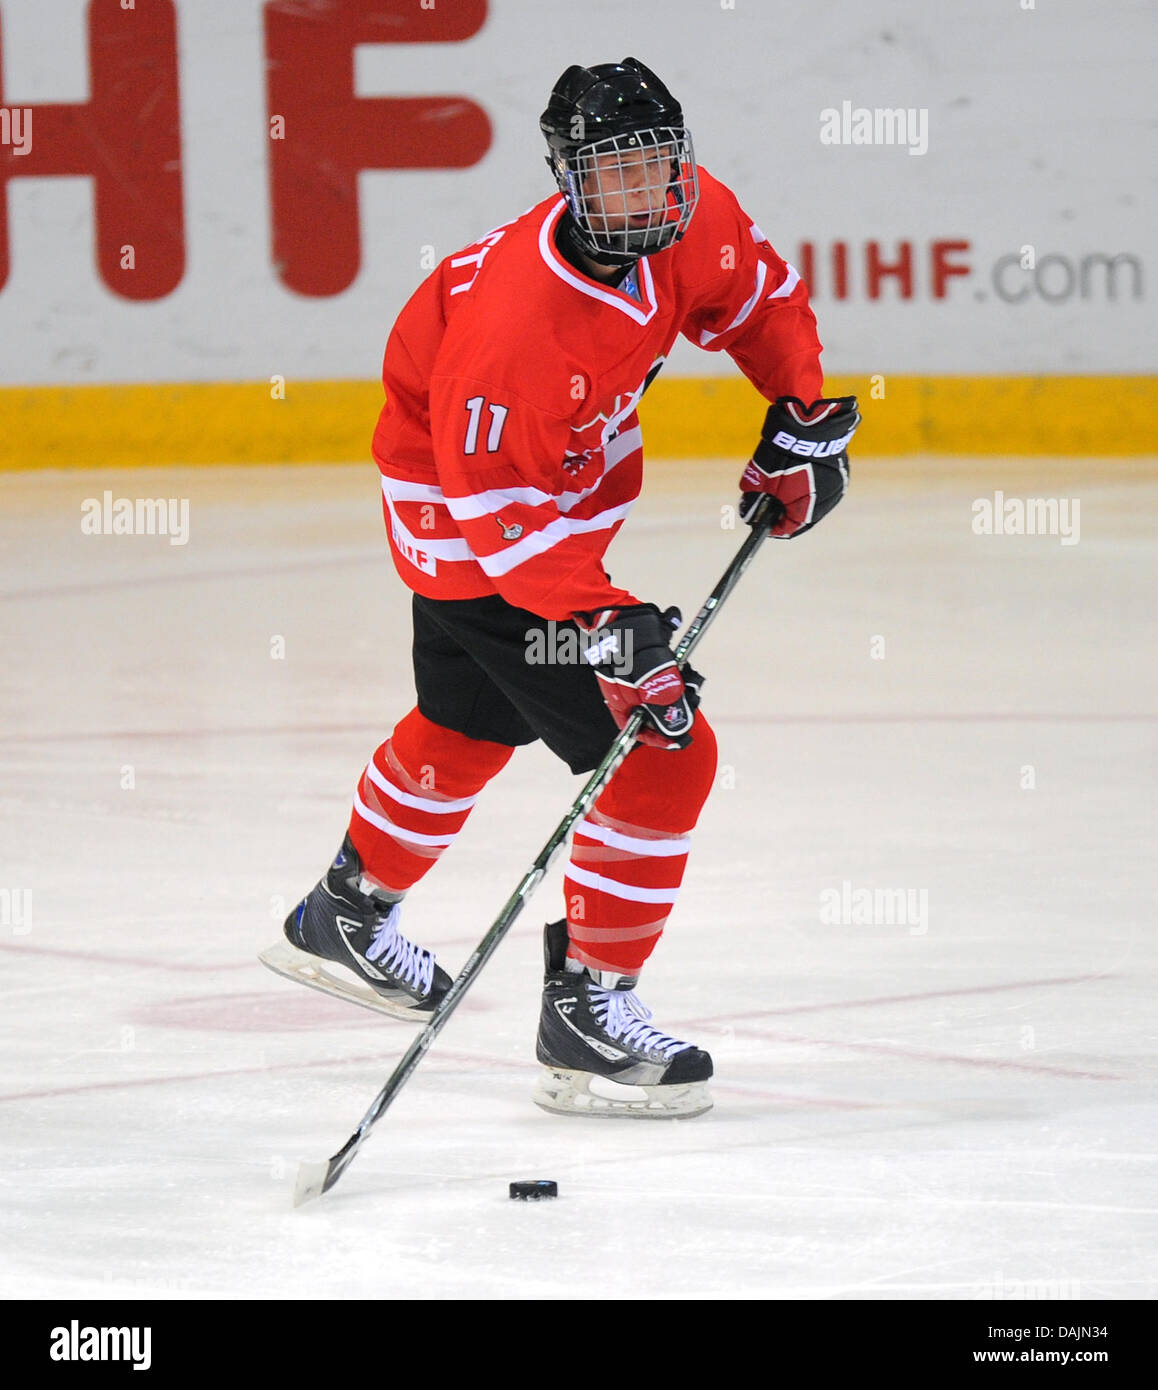 Canada's Reece Scarlett is pictured during the IIHF U18 World Ice Hockey Championships at the EnergieVerbund Arena in Dresden, Germany, 19 April 2011. Photo: Thomas Eisenhuth Stock Photo